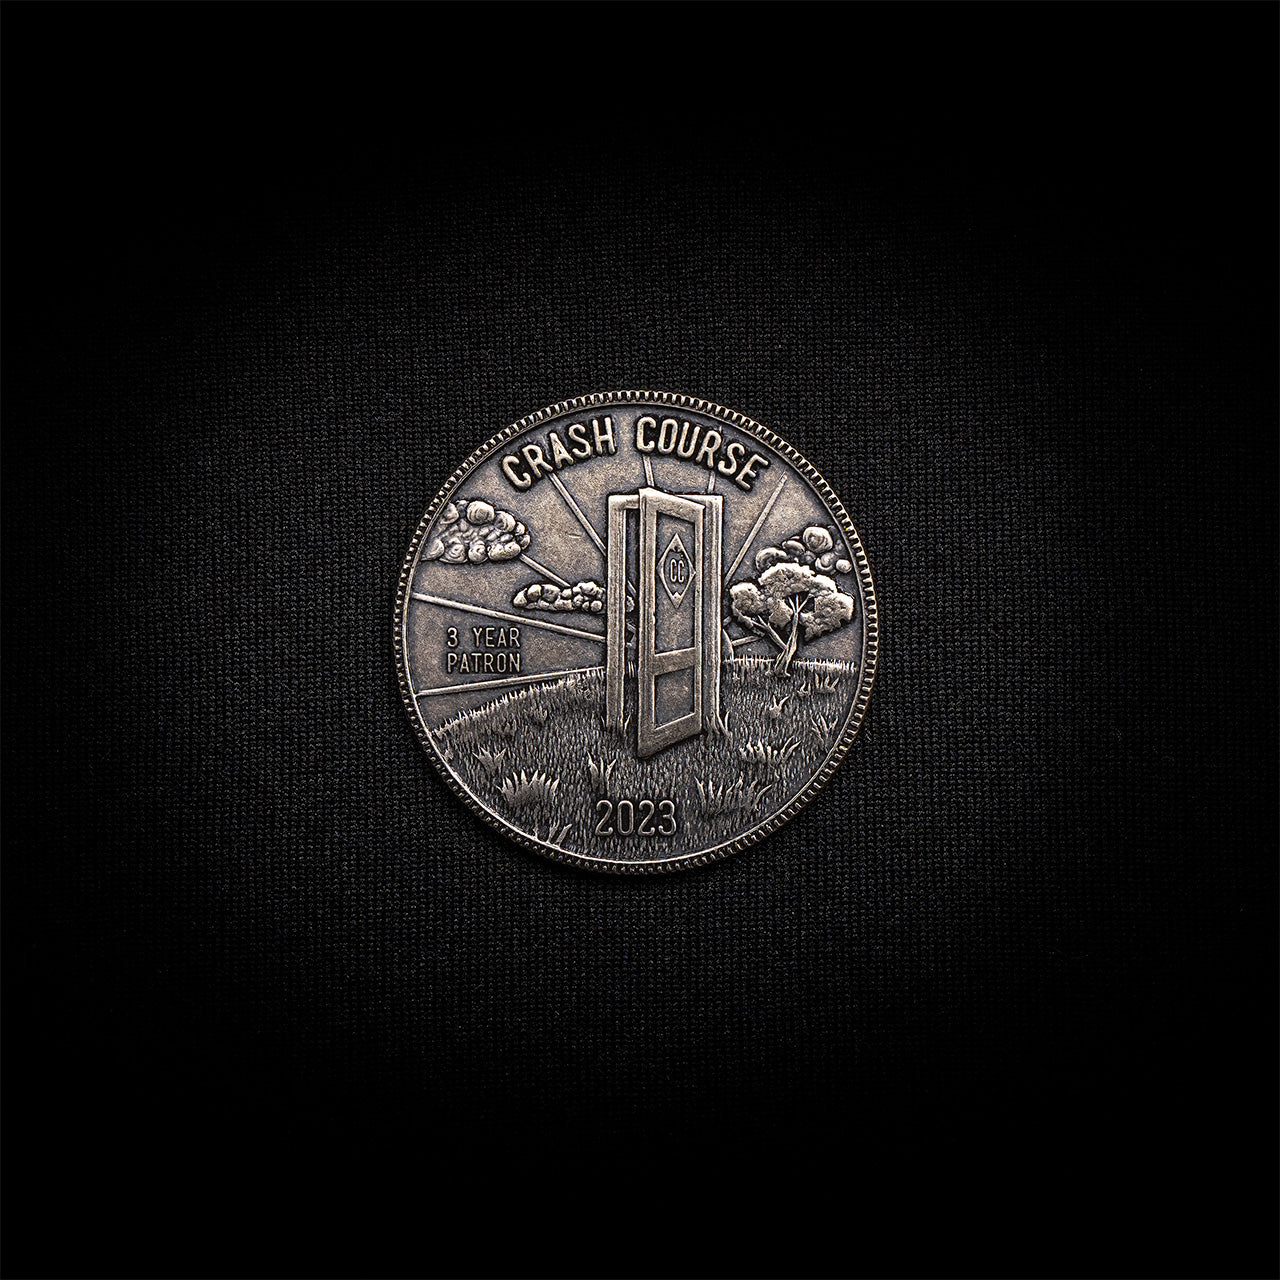 Image of the front side of a hand-engraved coin on a black background. The design on the coin is an image of a door frame with an open door on a grassy hill with sunshine rays beaming in the back. The coin is carved with the Crash Course title, the year 2023, and the phrase "3 year patron".